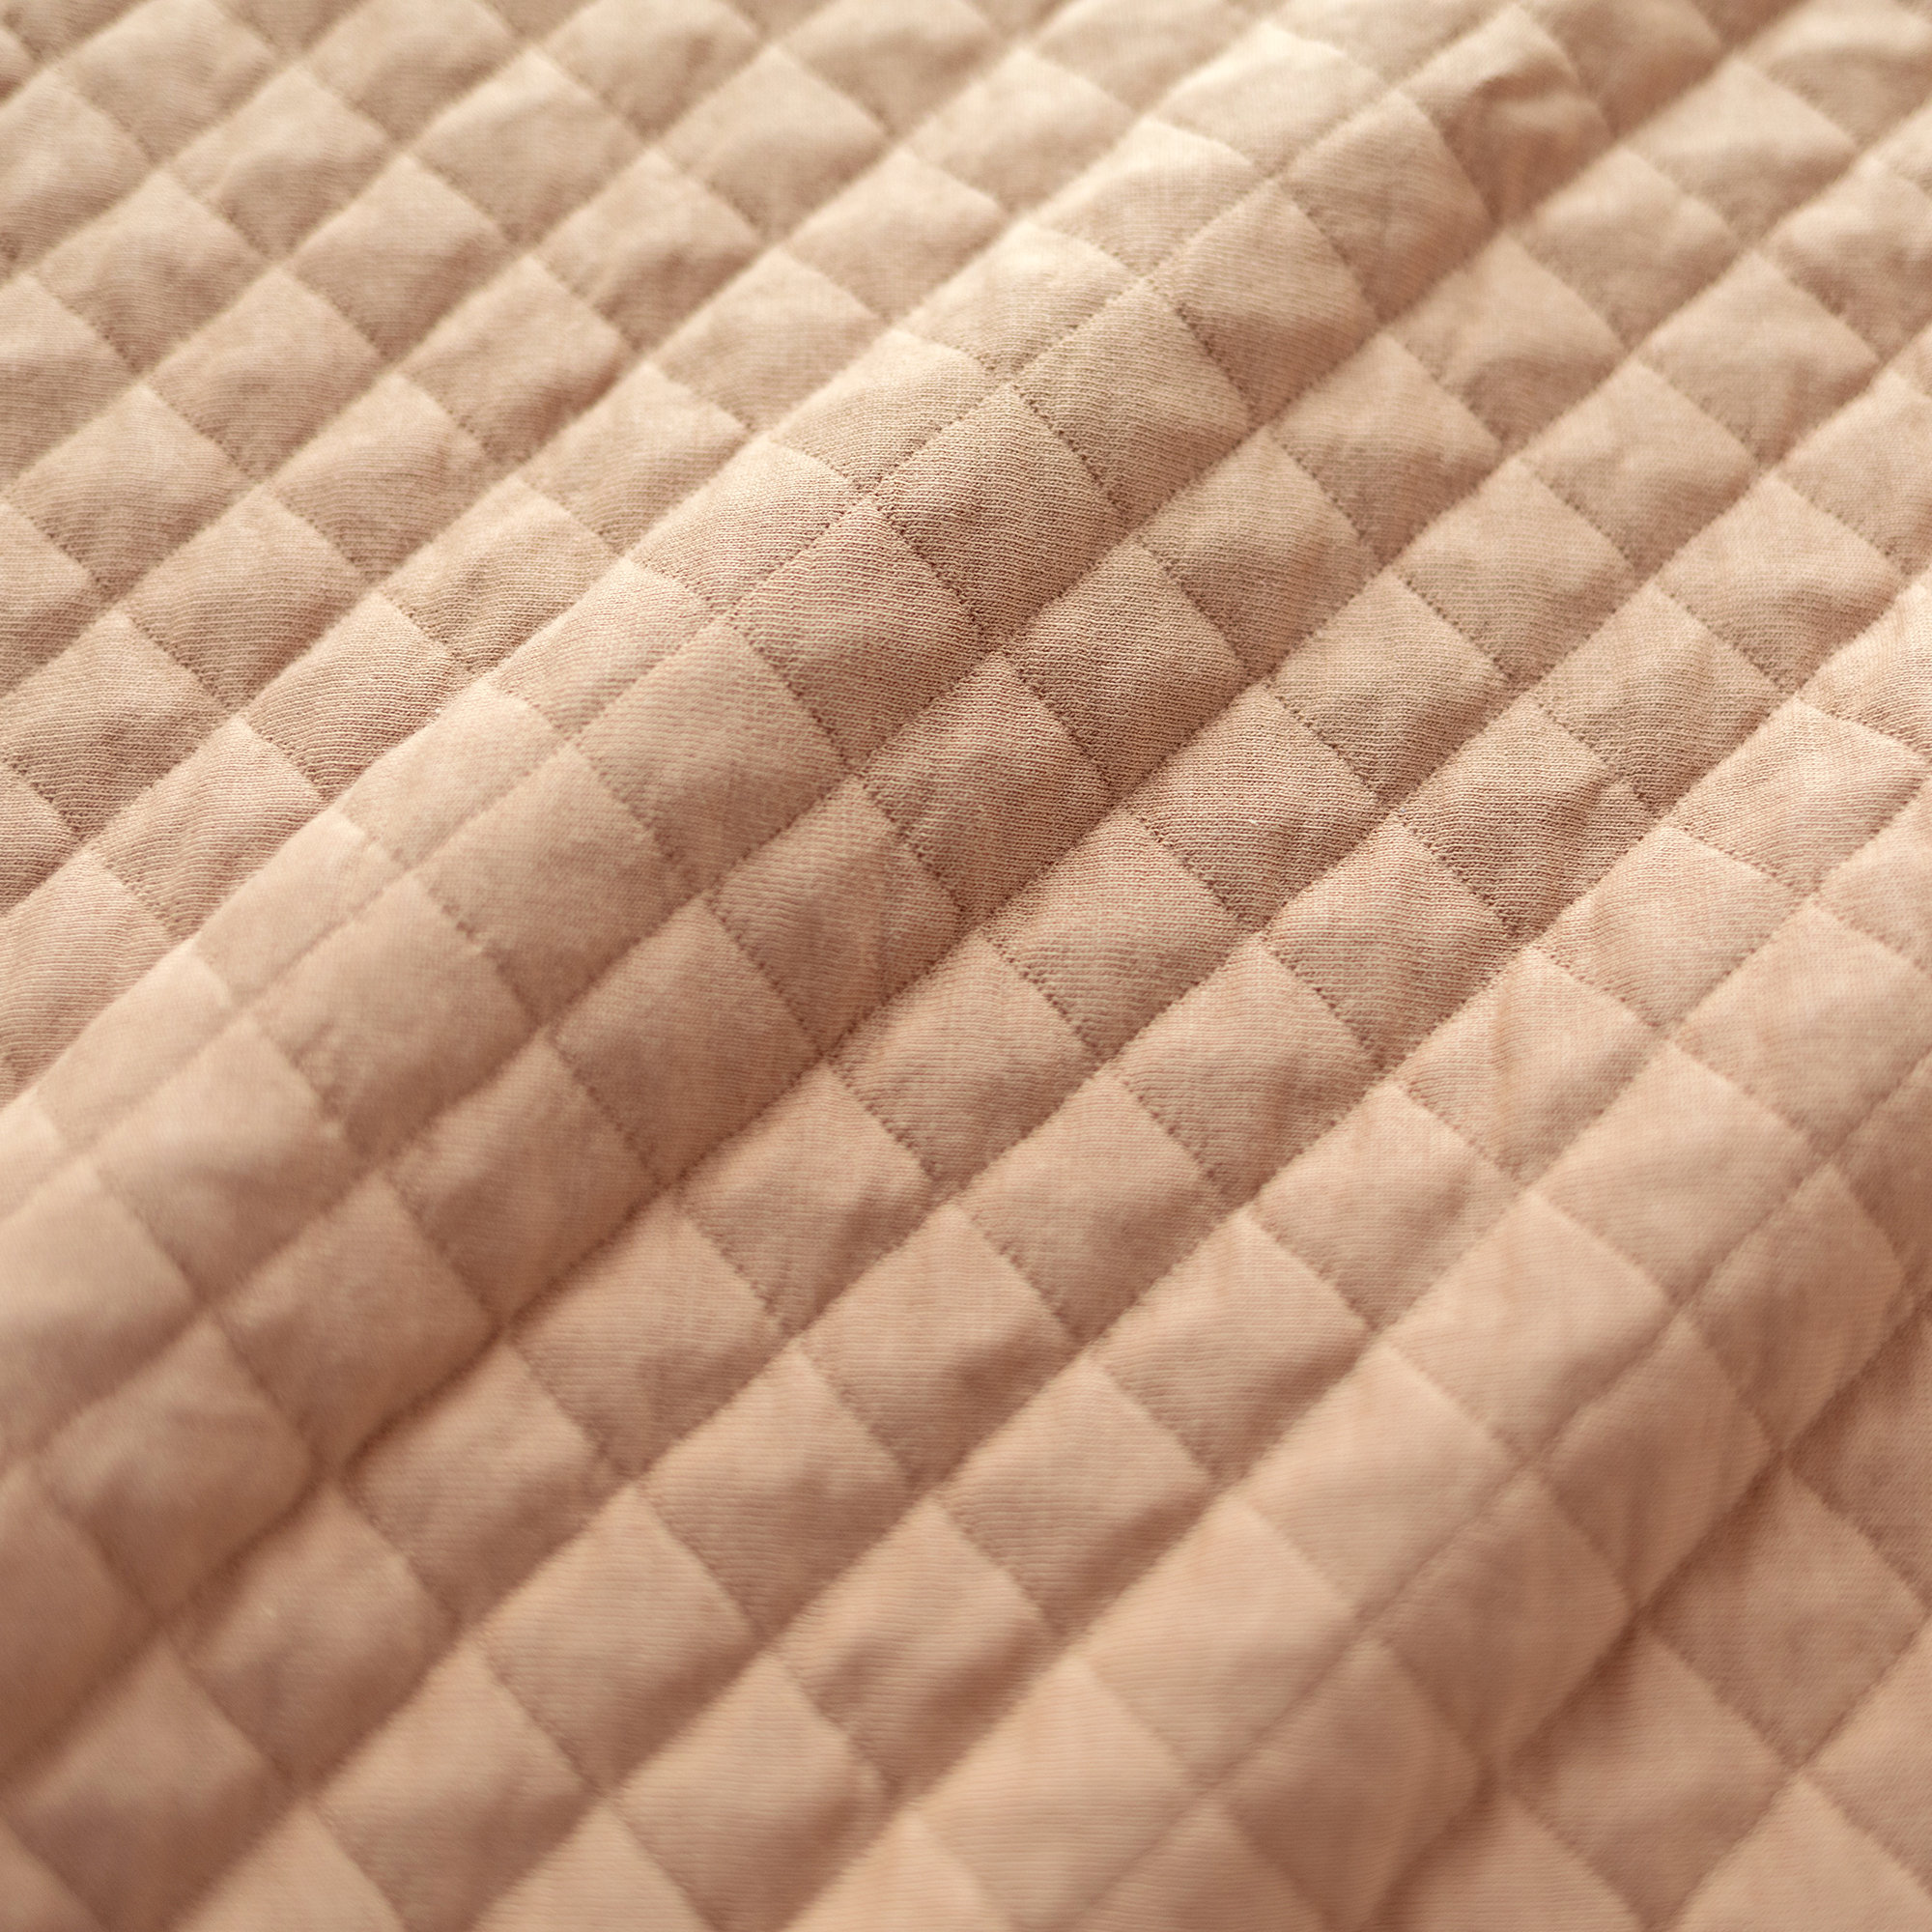 Slab waterproof Pady quilted jersey 37cm QUILT Beige[CARE]